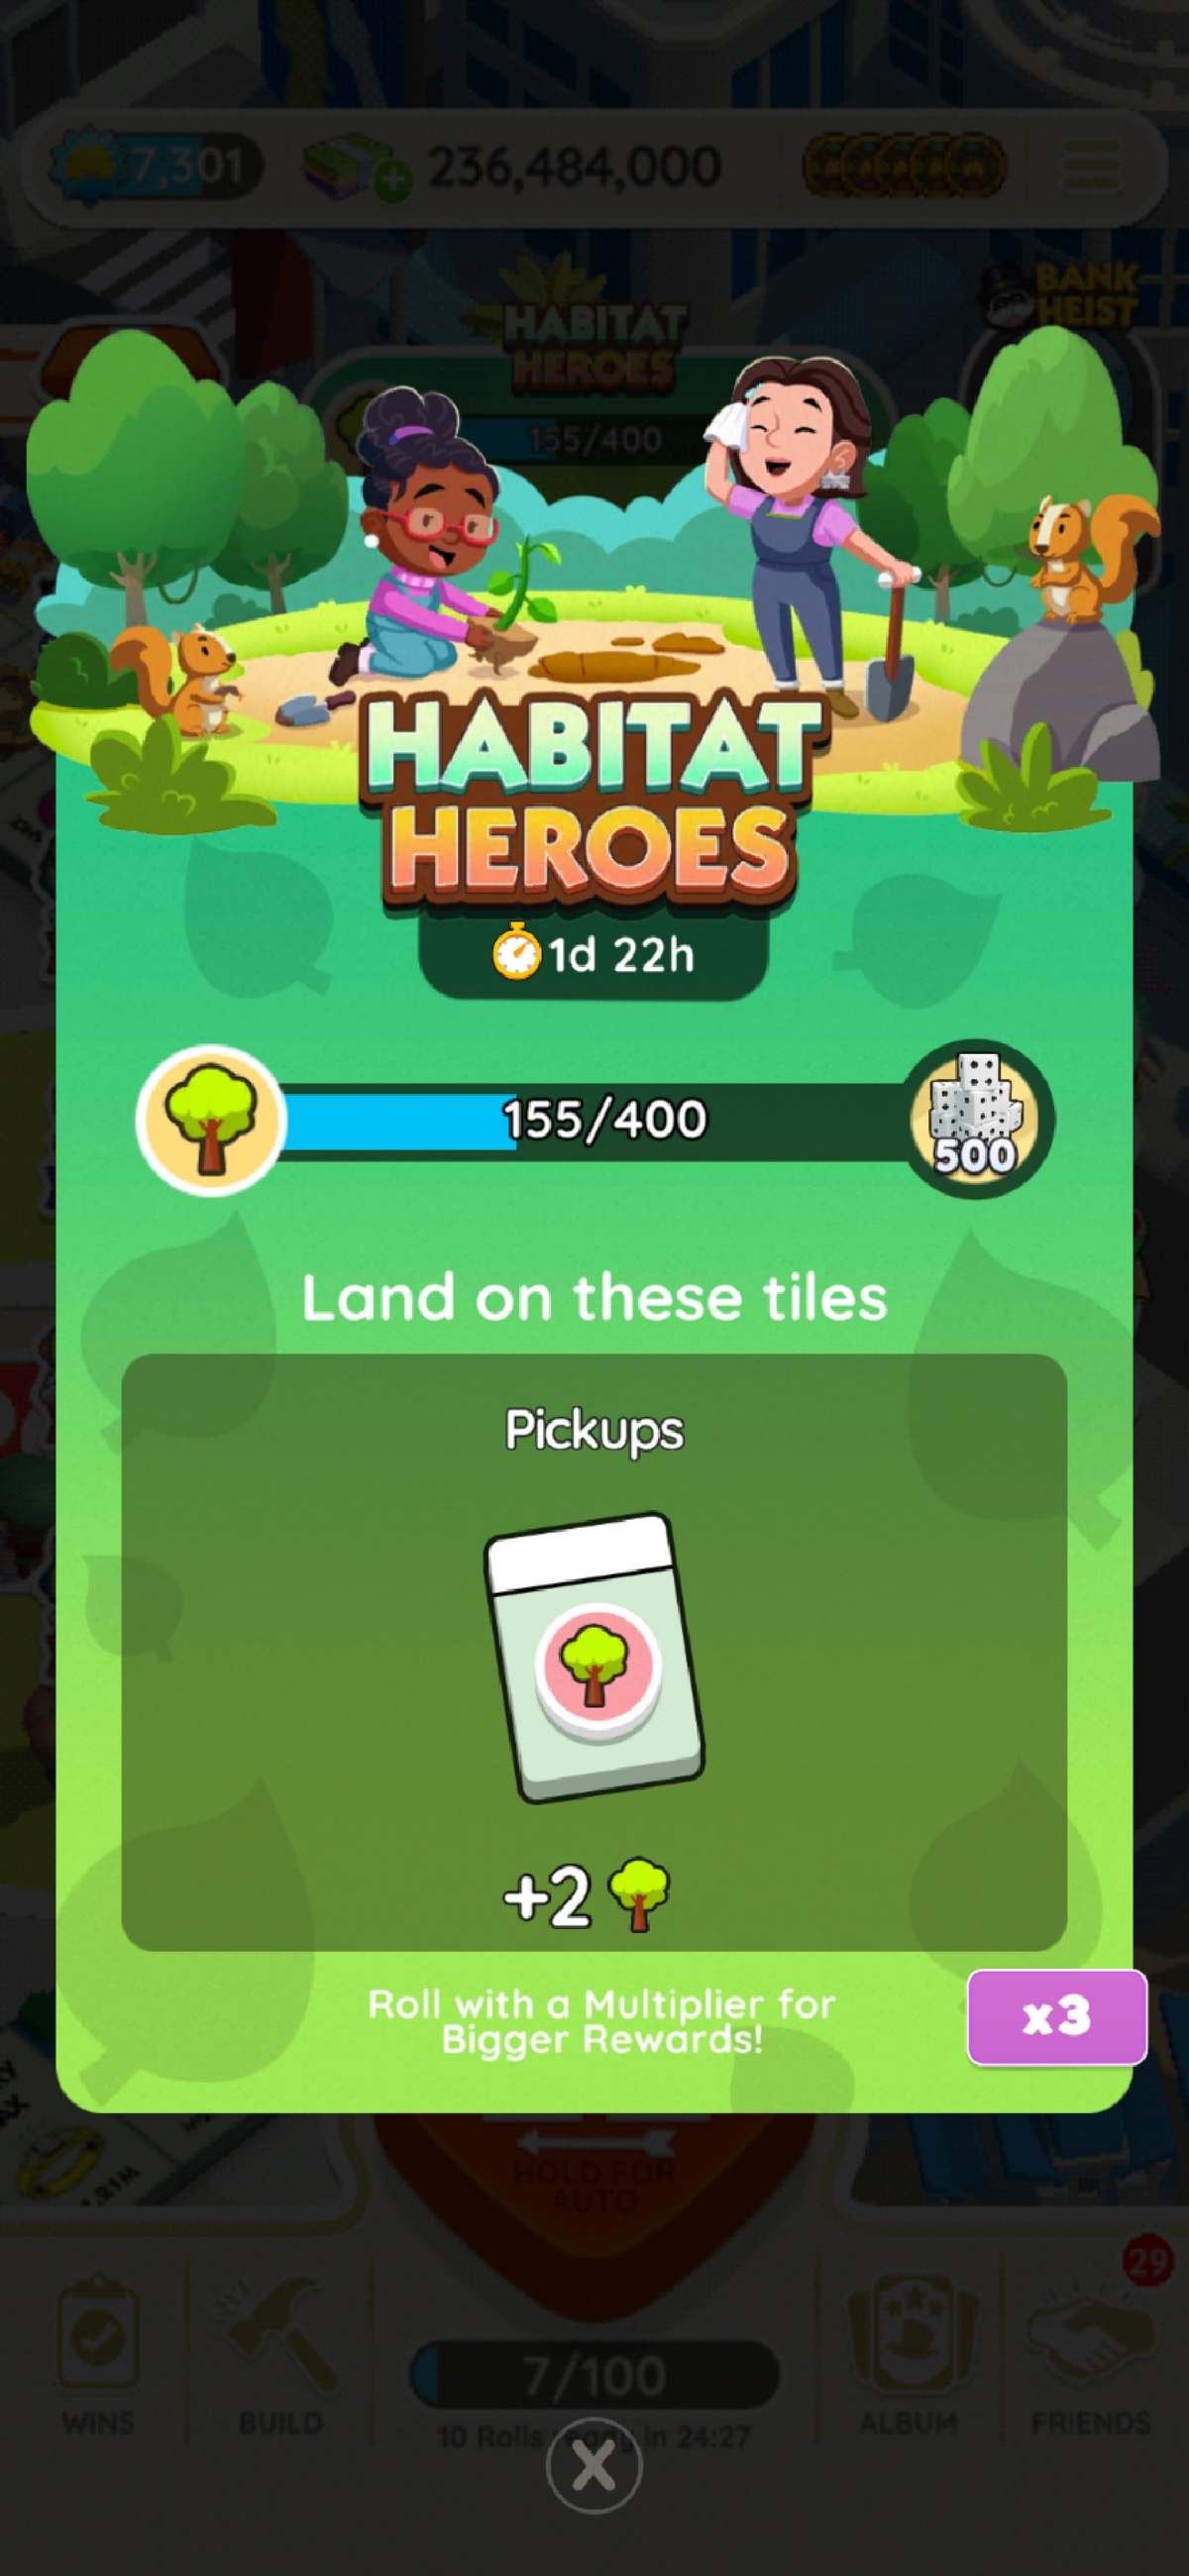 A full-size image for the Habitat Heroes event in Monopoly GO showing two people digging a hole in the ground as they stand between two trees. The image is part of an article on all the rewards and milestones that are part of the Habitat Heroes event in Monopoly GO.